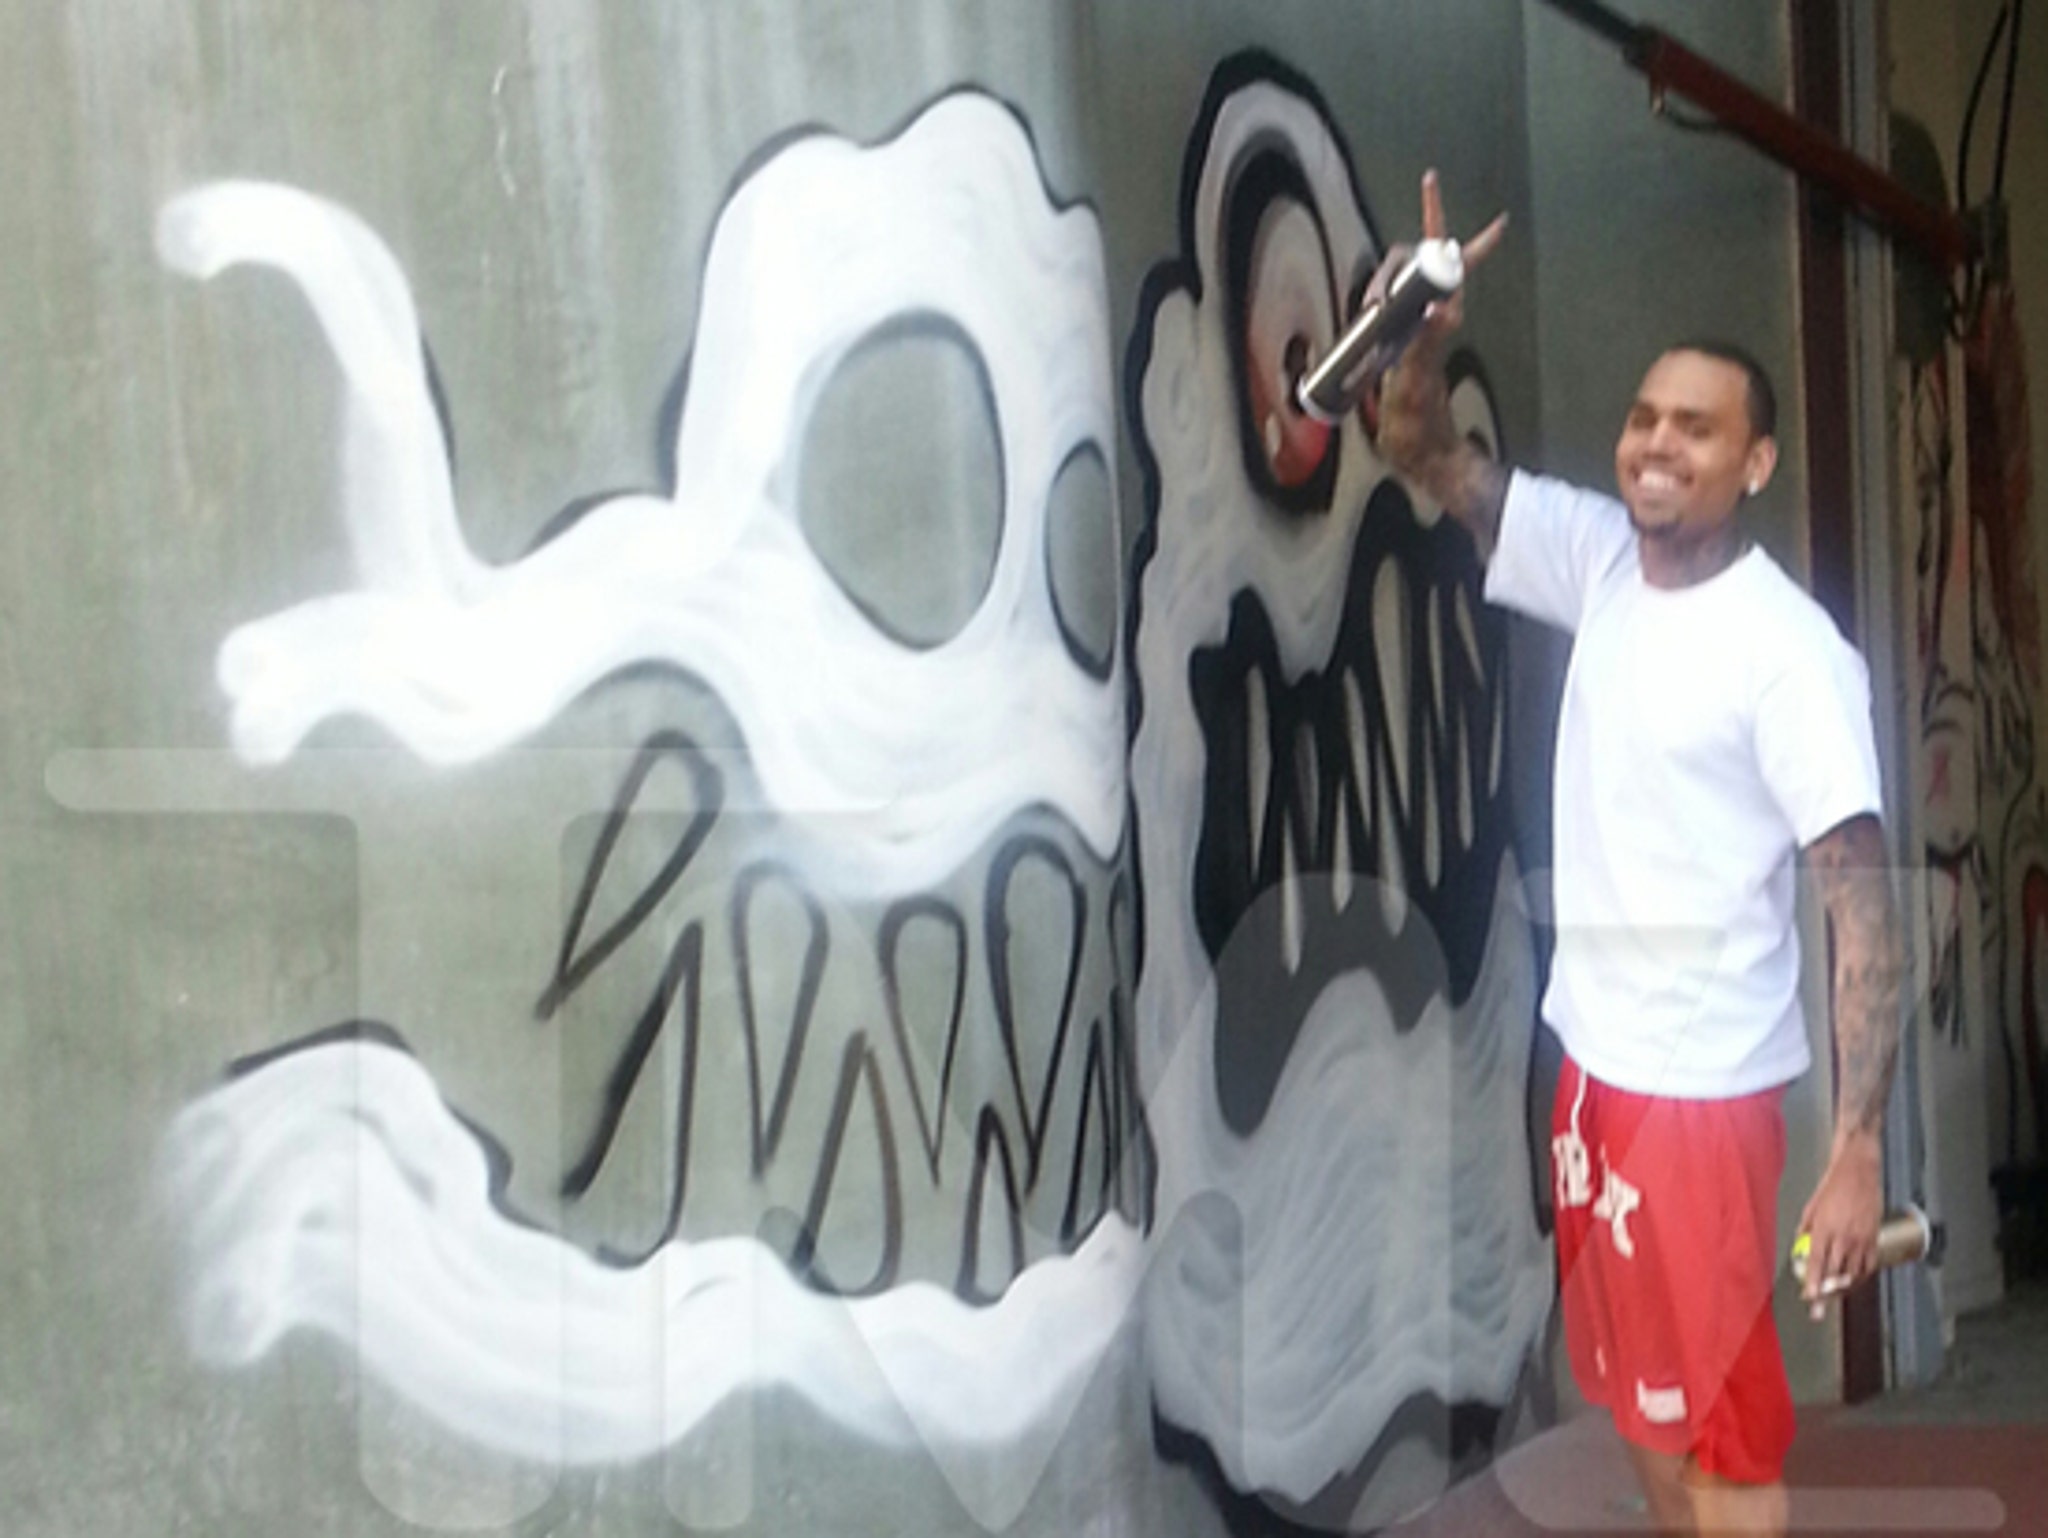 Chris Brown To L A City My House Graffiti Is Protected By The 1st Amendment